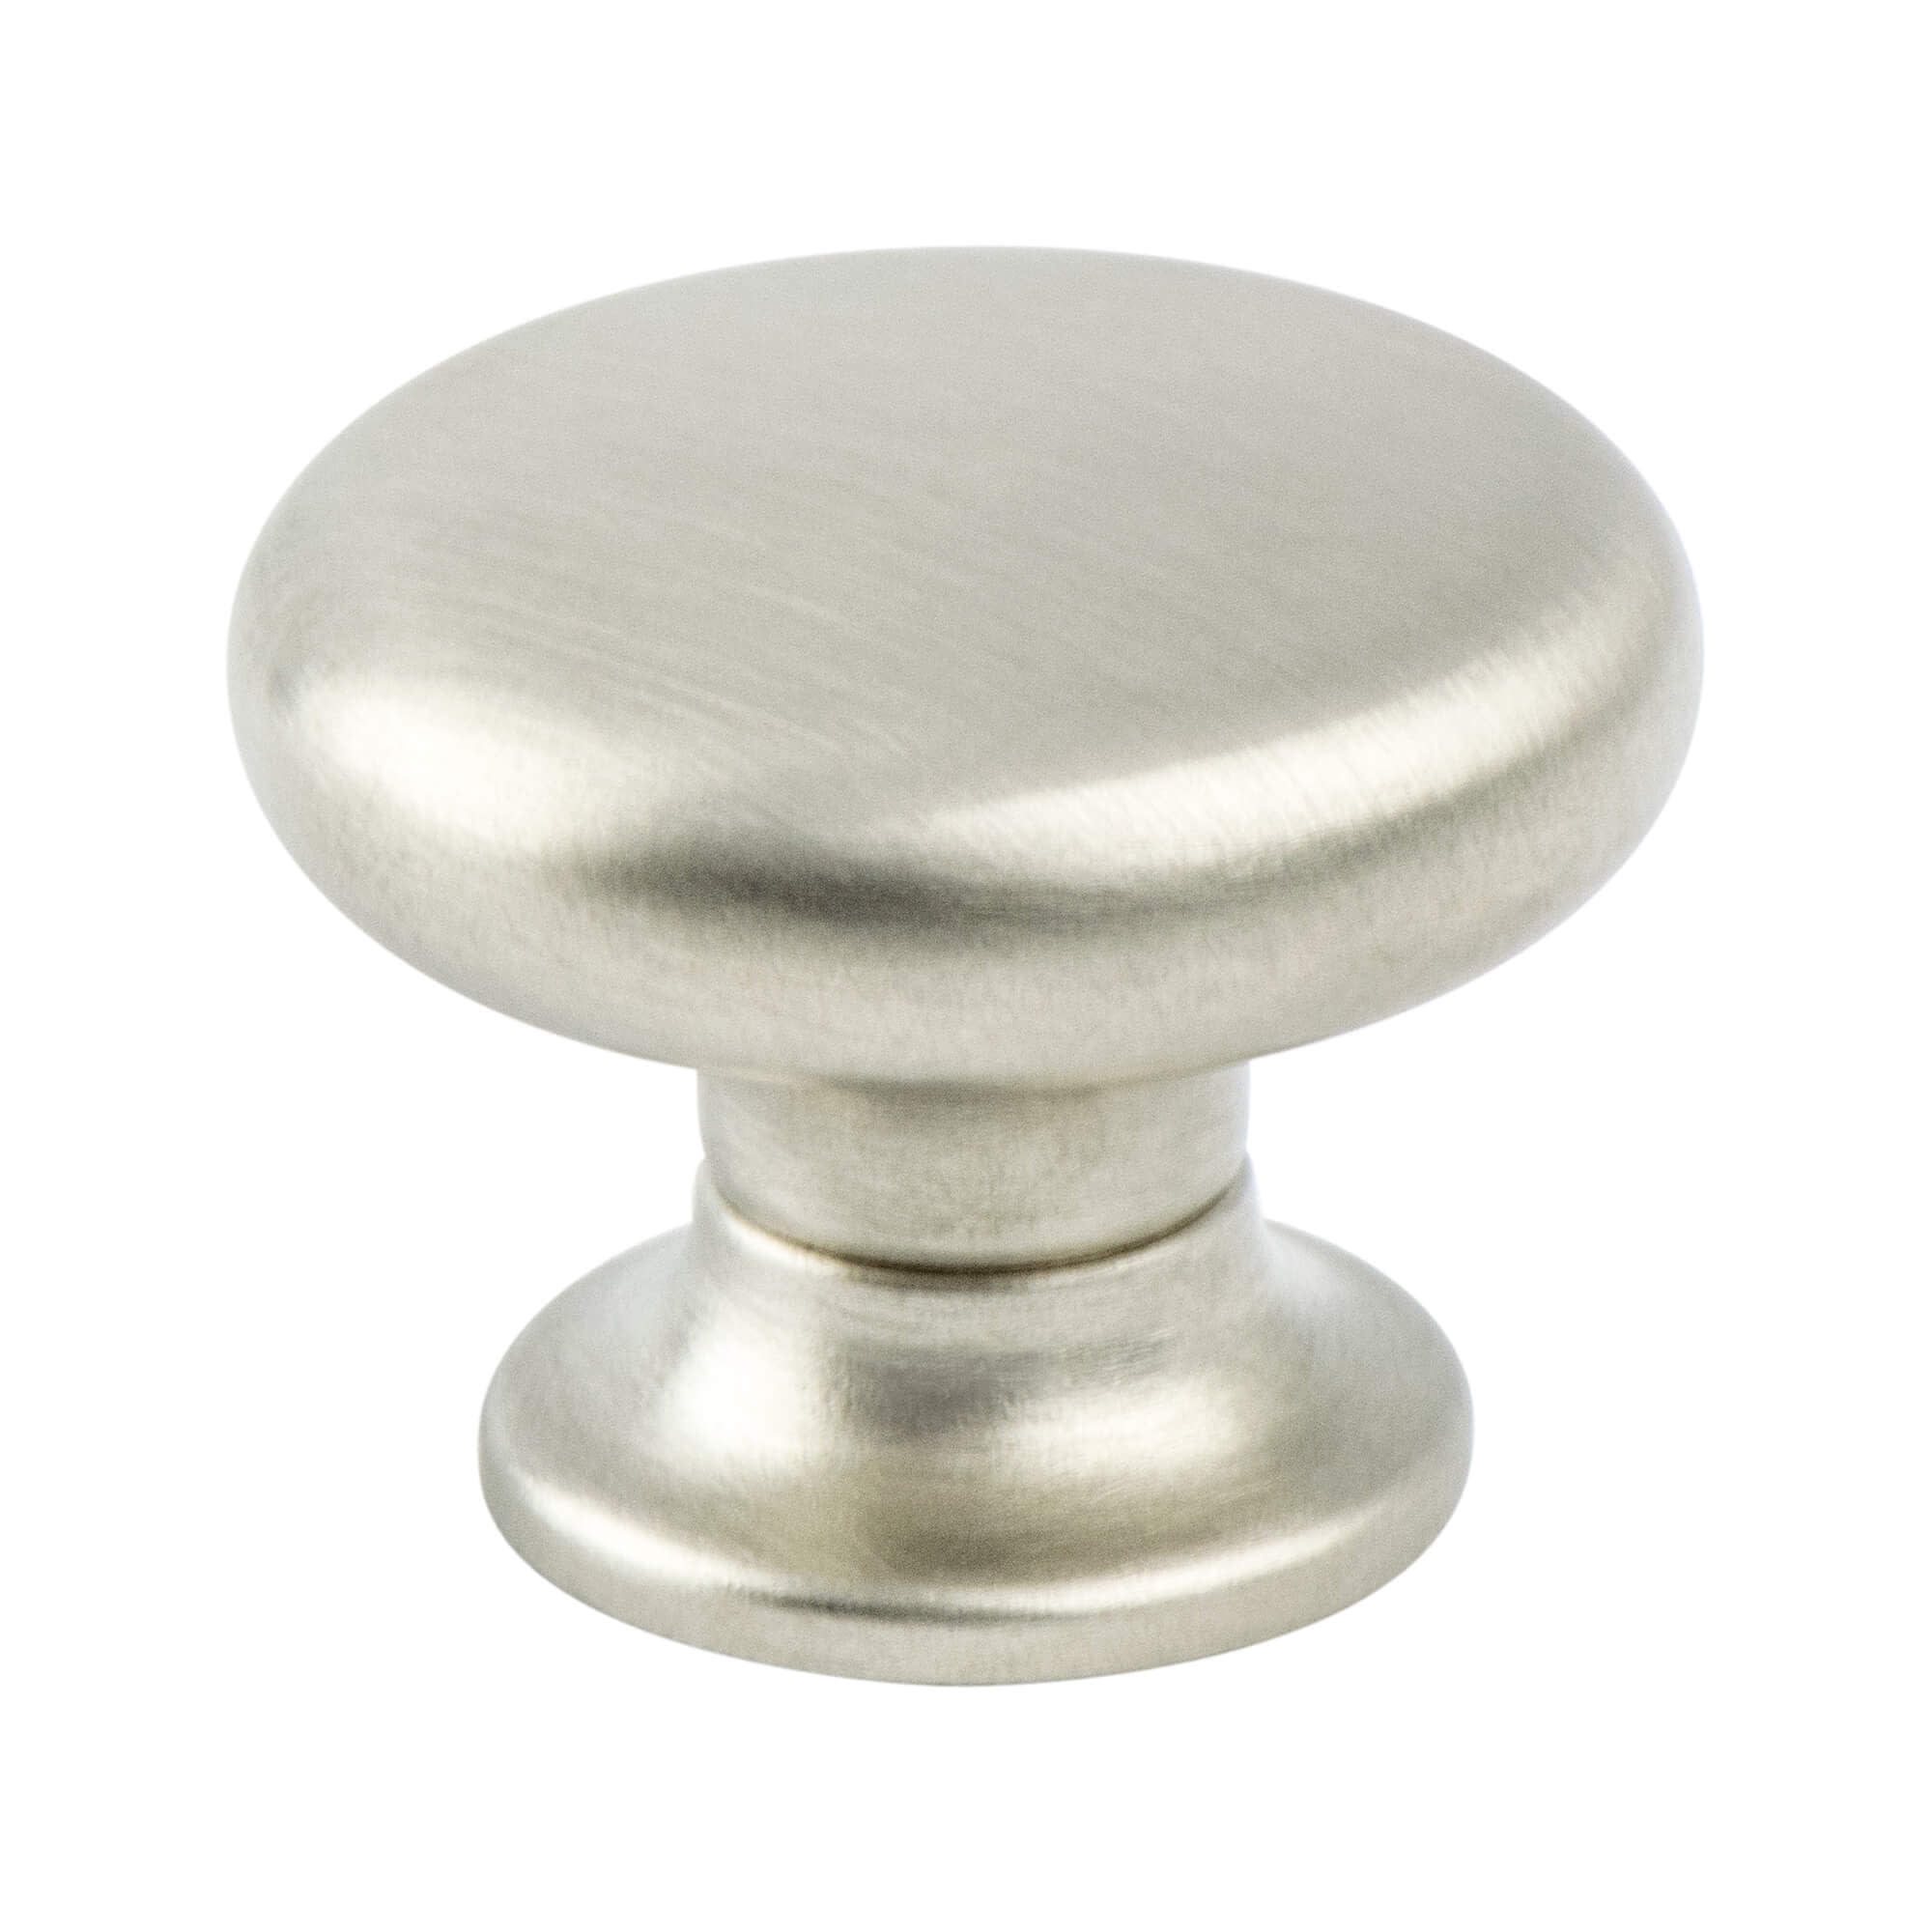 7011-1bpn-c 1.187 In. Dia. Valencia Knob With Brushed Nickel